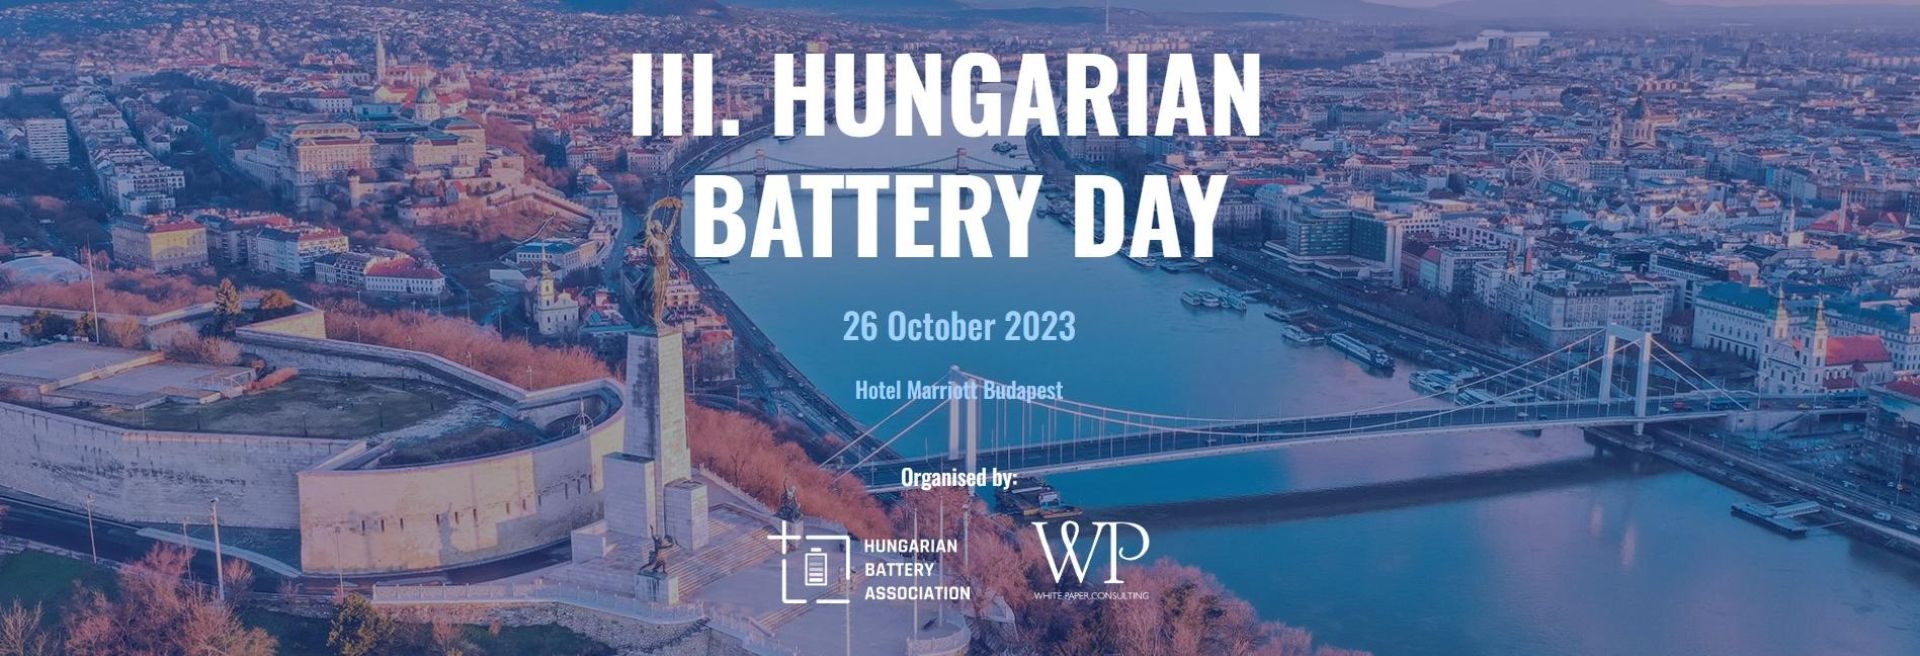 Stay Tuned for the Third Edition of the Hungarian Battery Day Coming up on 10/26